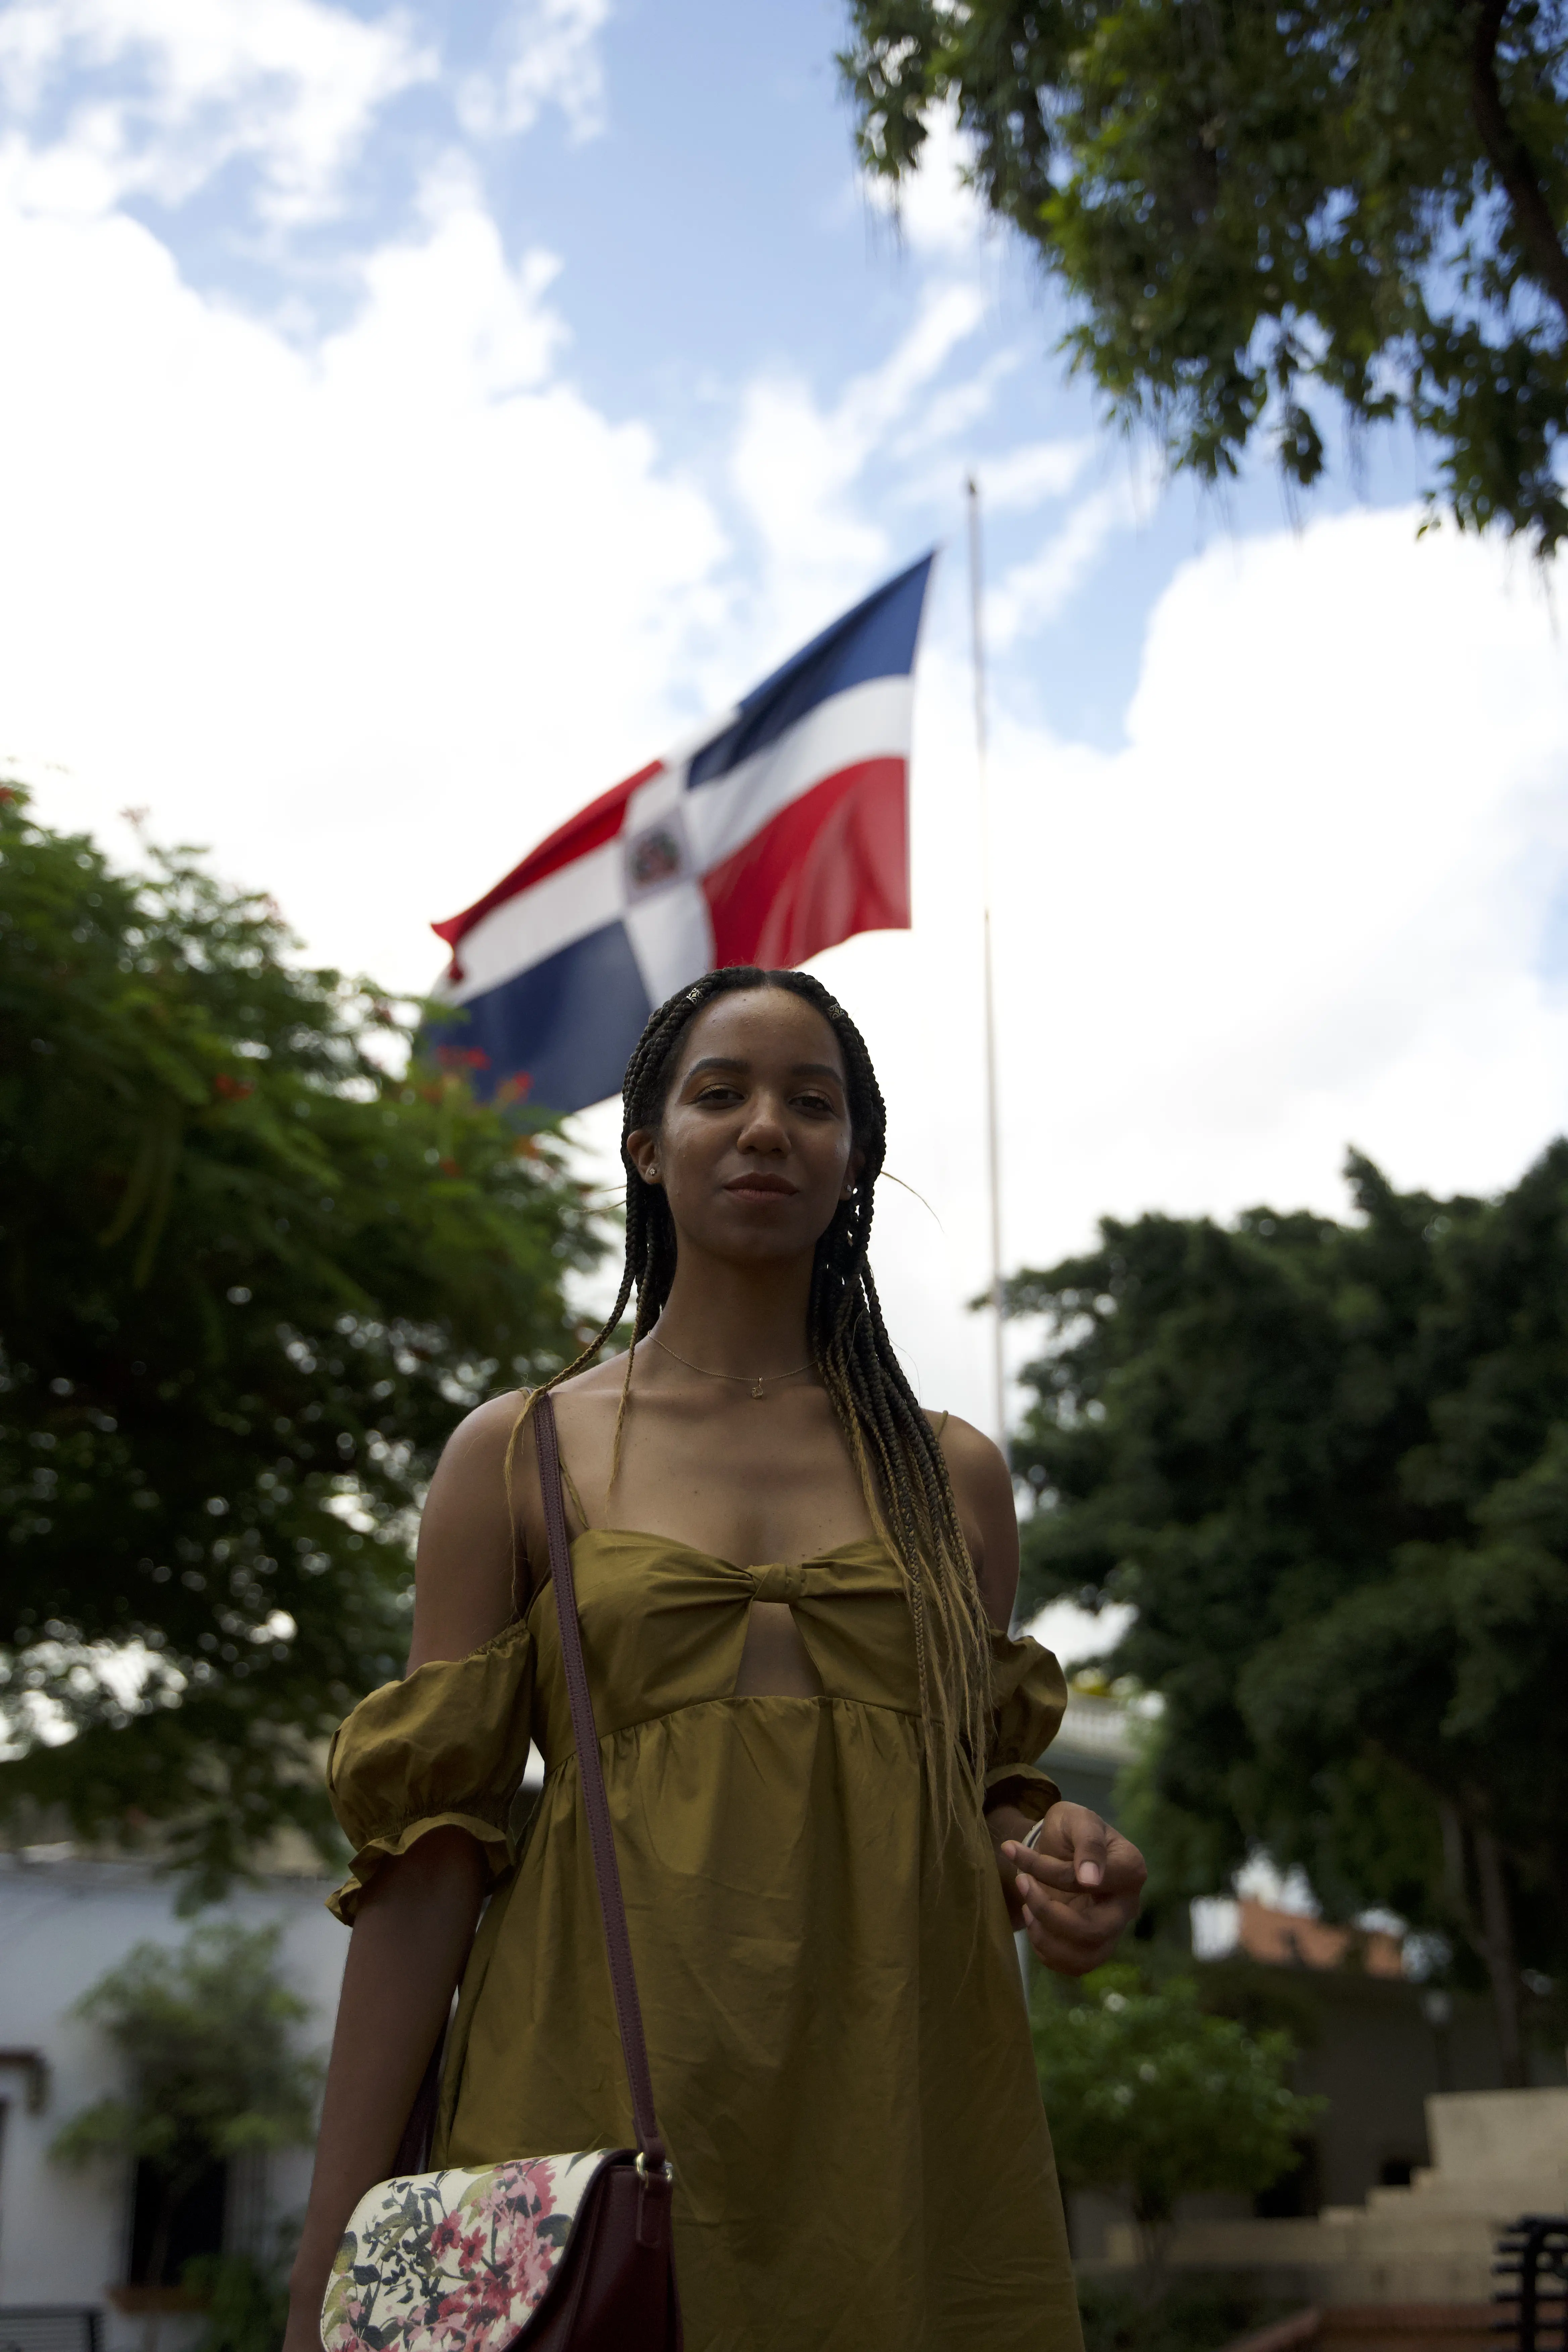 Natalia Perez-Gonzalez stands in front of the Dominican flag.